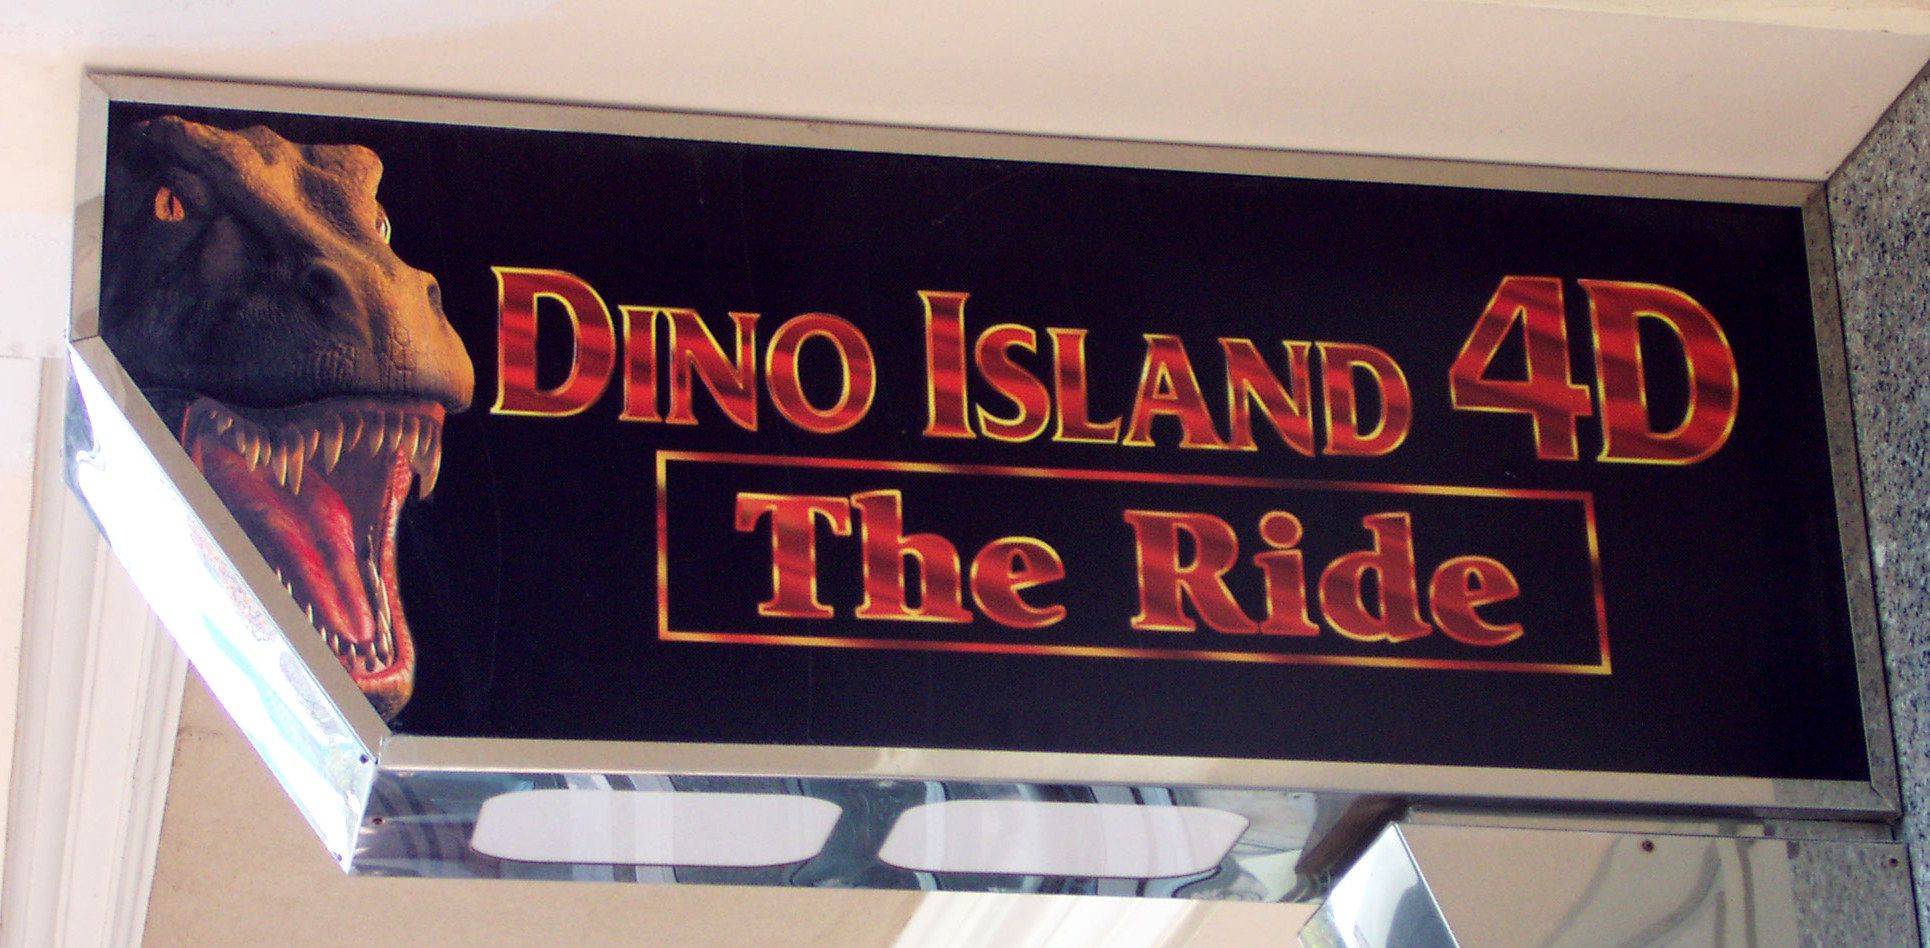 Dino Island 4D The Ride sign